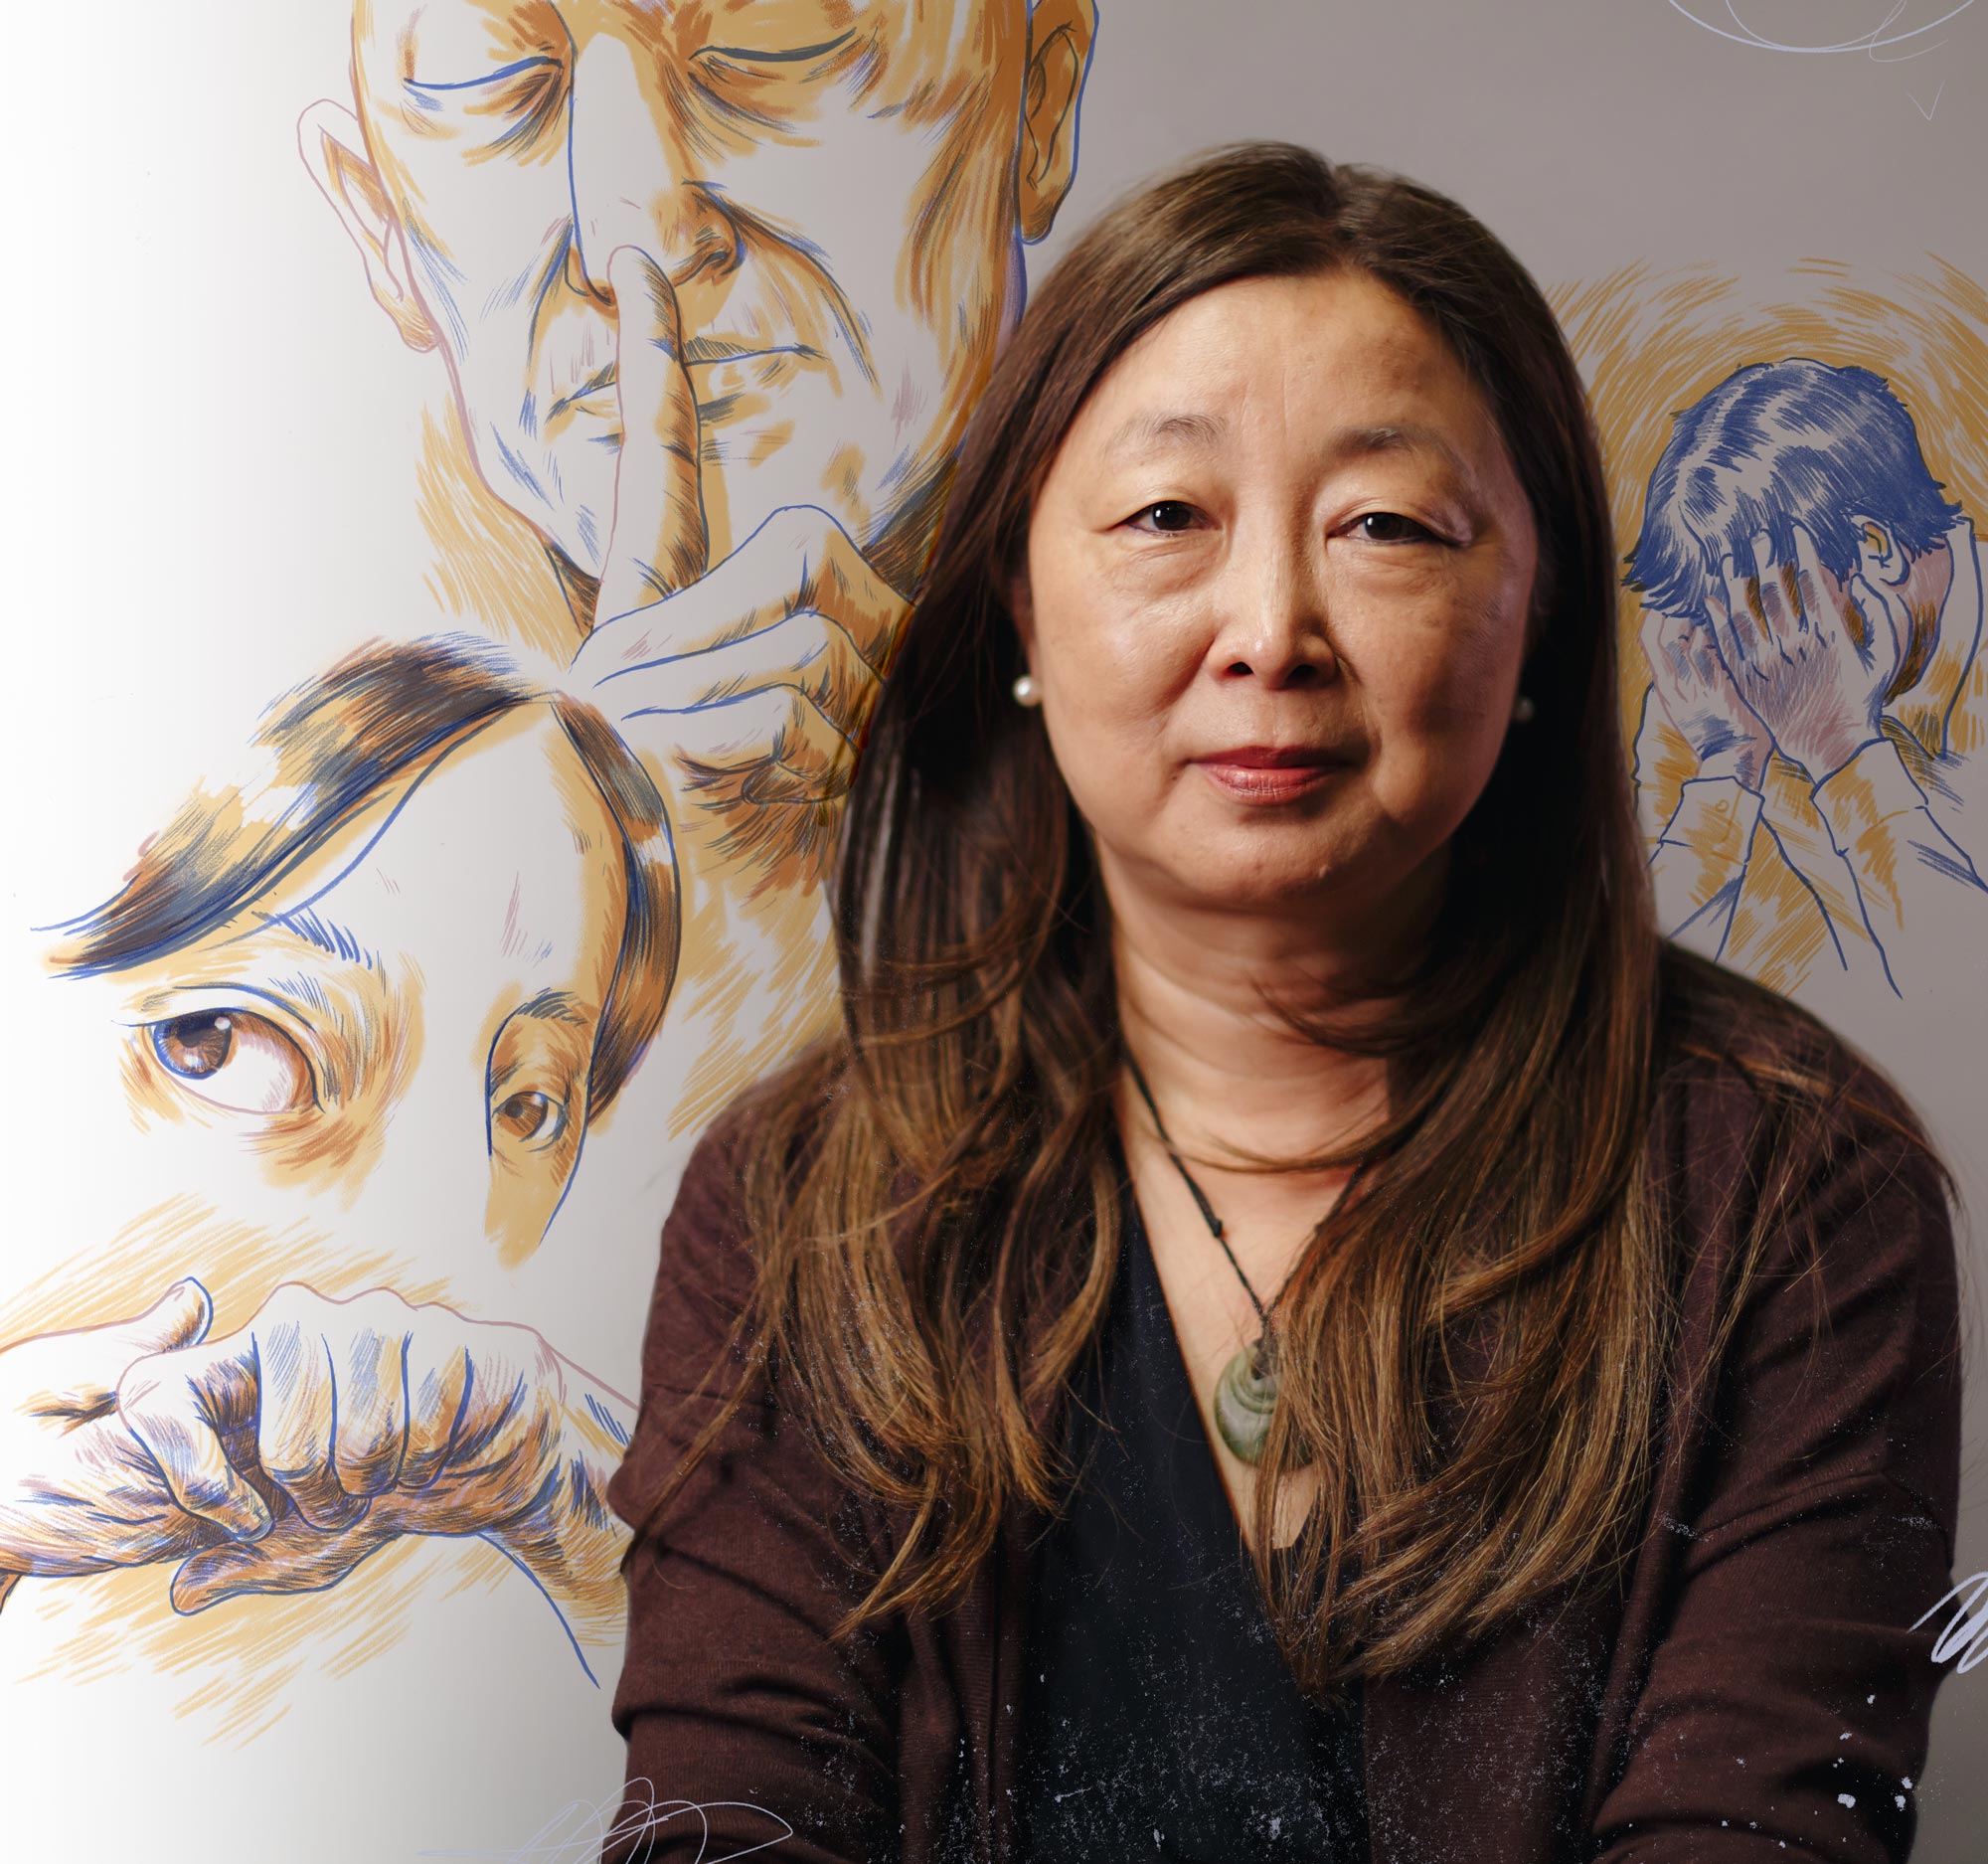 Photo of Interim Dean Eileen Fung set against close up illustrations of faces and a hand